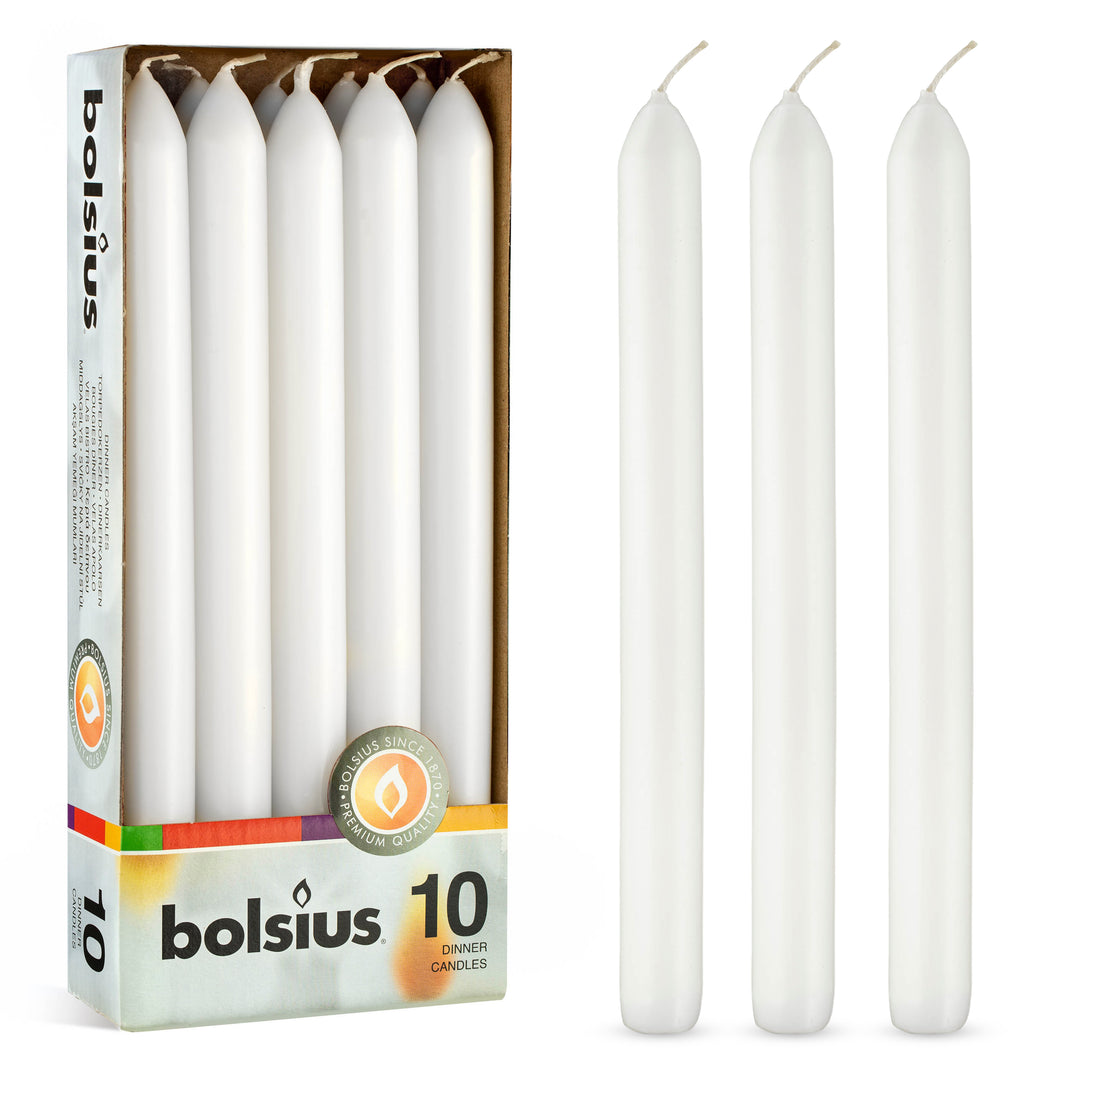 9" X 0.8" Classic Dinner Taper Candles - 10 Pack - Kisco Candles